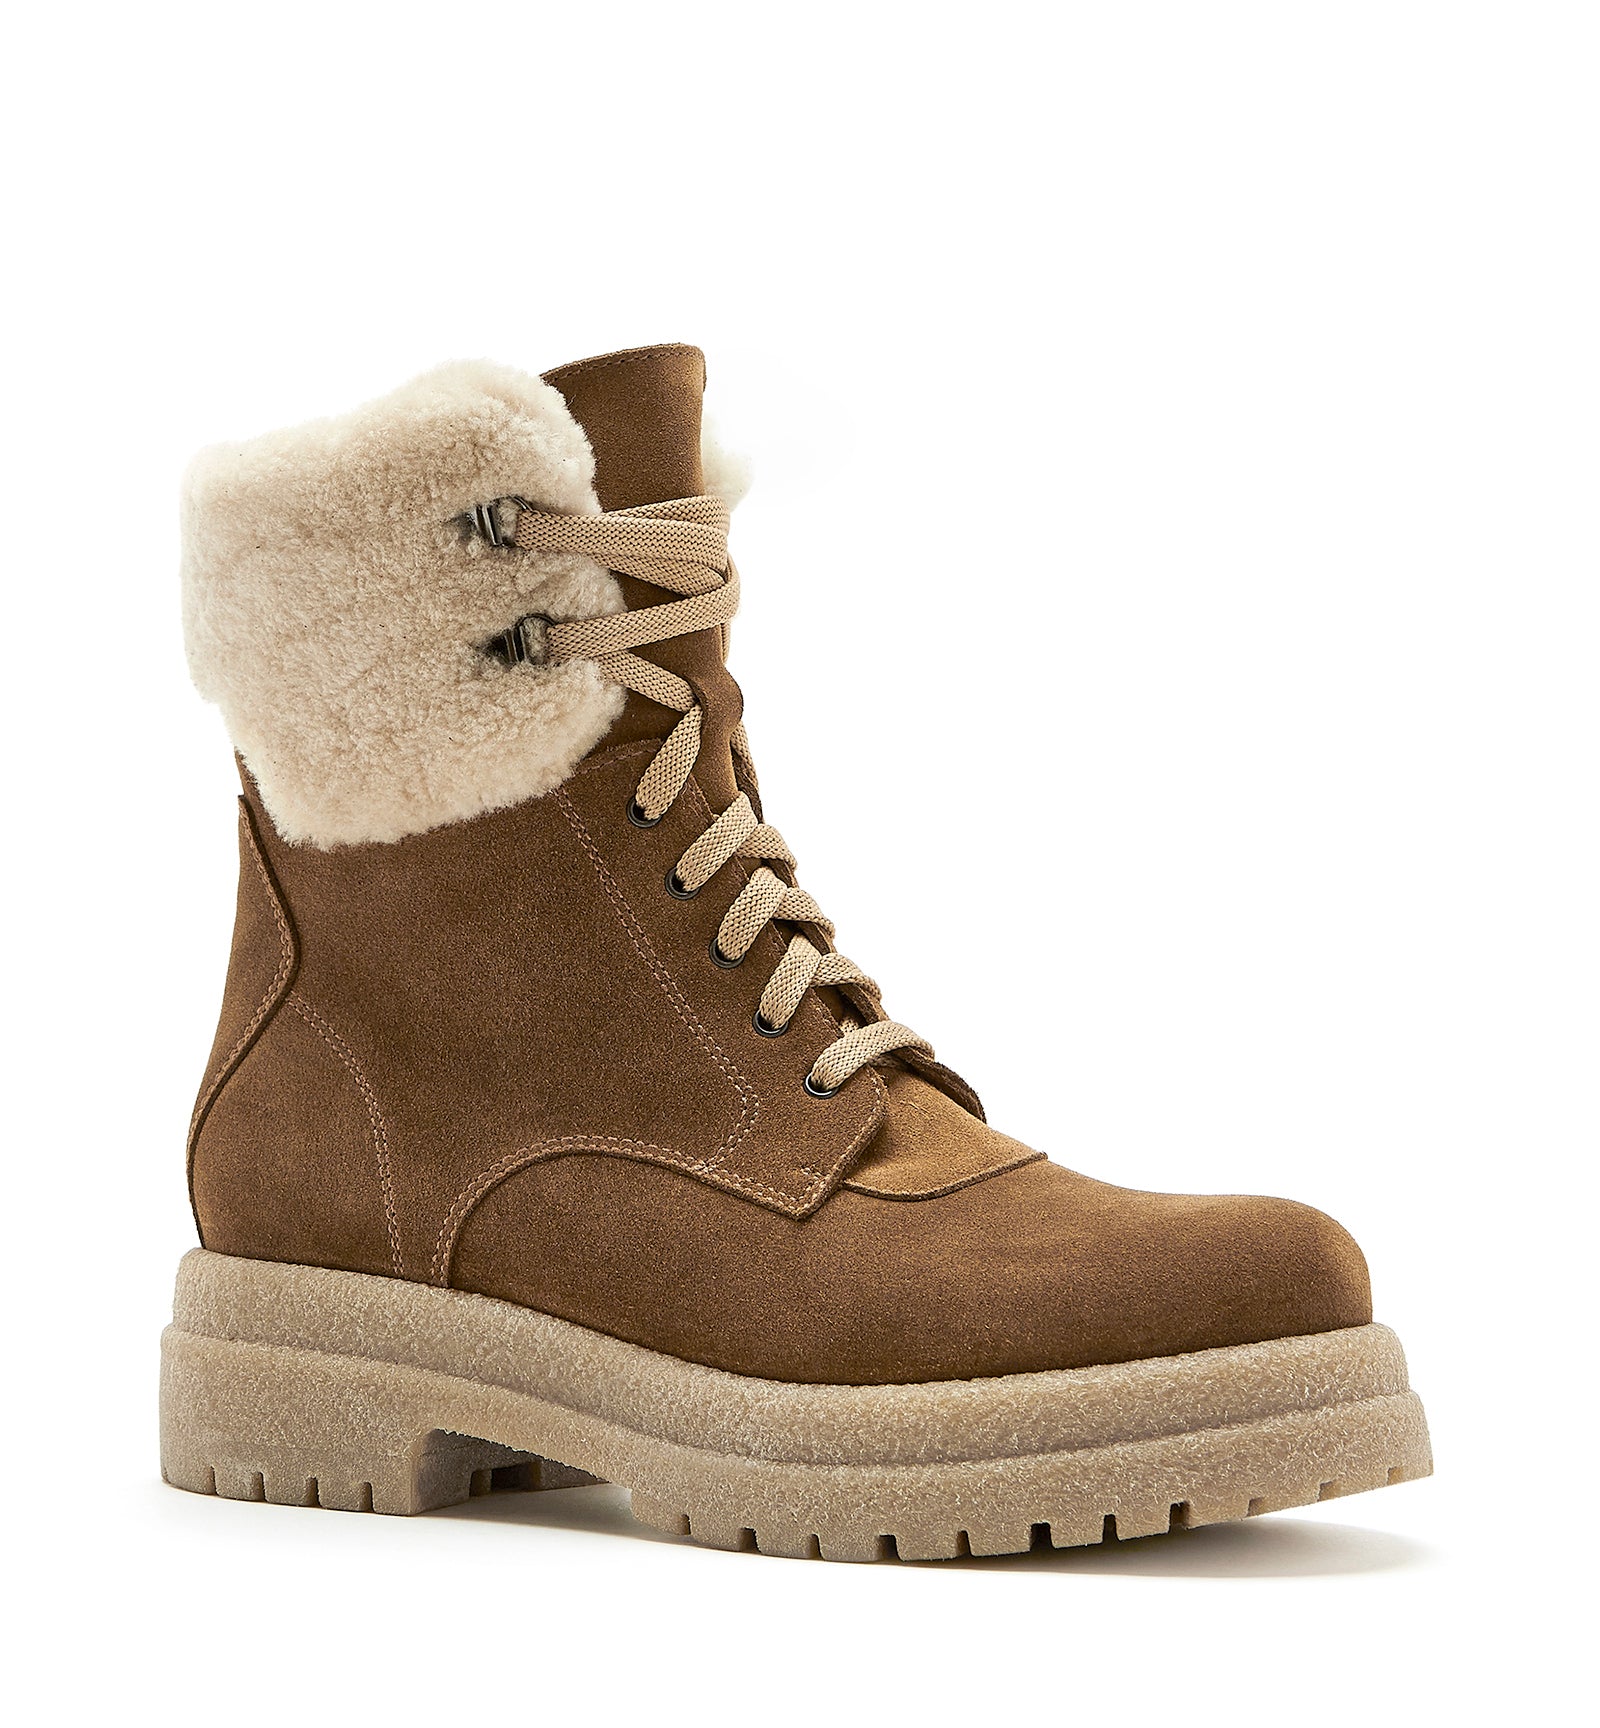 Victor Suede Boot in Walnut